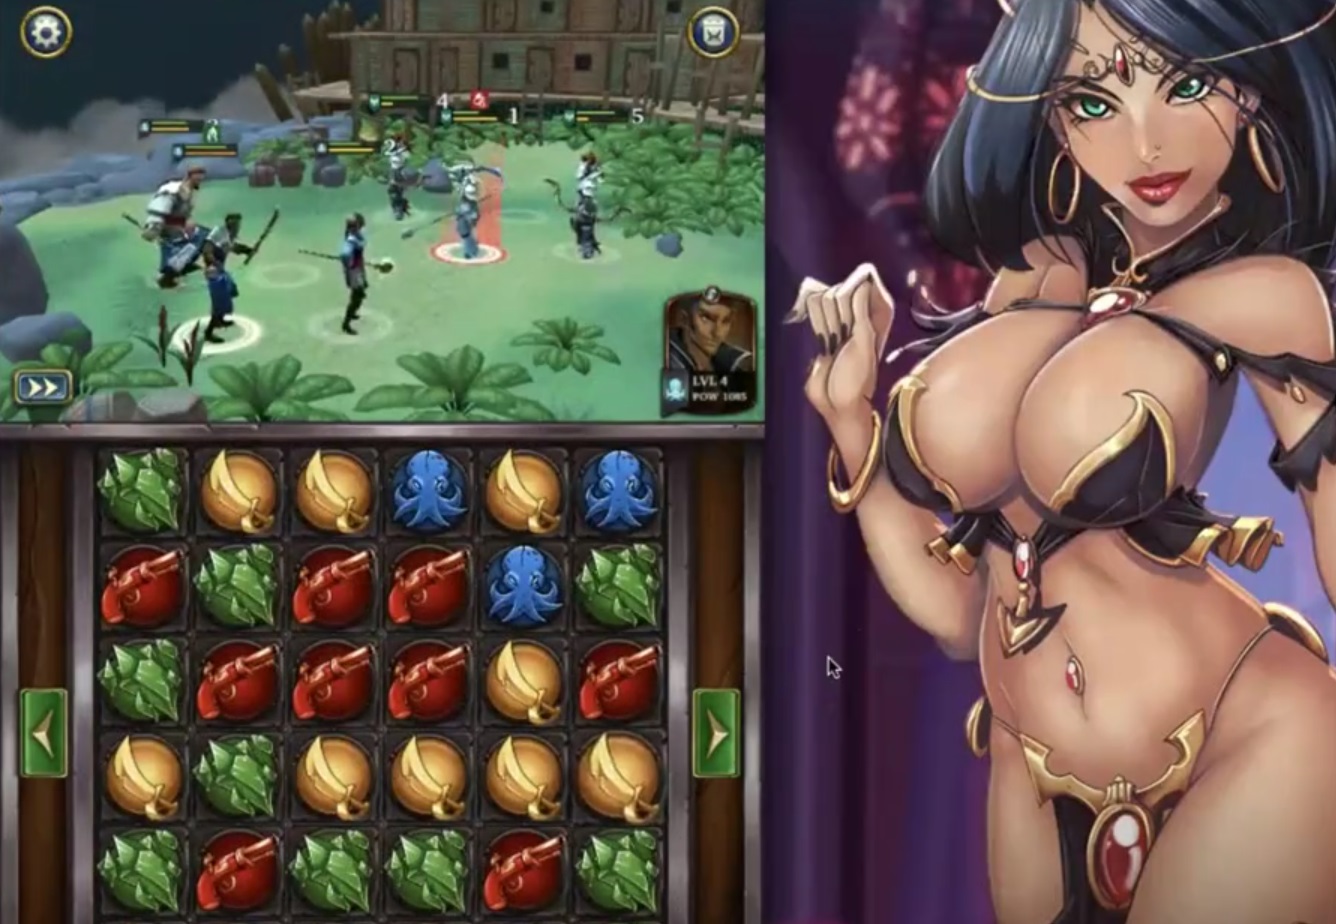 Mobile Adult Game Review: Saber's Edge - Hentaireviews